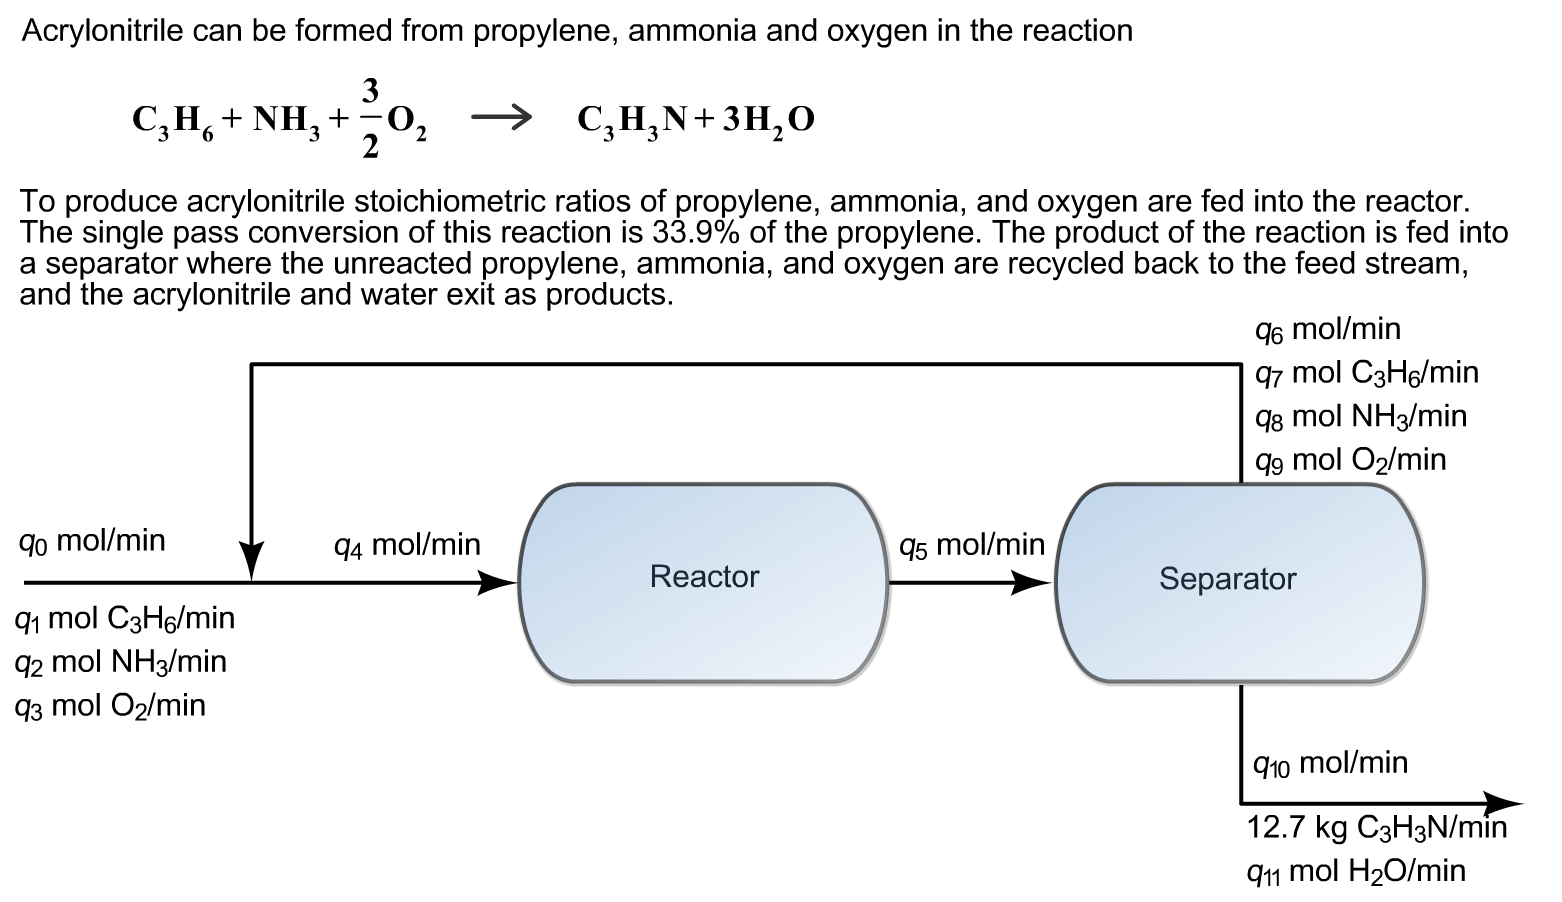 Acrylonitrile can be formed from propylene, ammonia and oxygen in the reaction
3
C,H, + NH, +
O,
> С,н,N+ зн,0
9.
2
2
To produce acrylonitrile stoichiometric ratios of propylene, ammonia, and oxygen are fed into the reactor.
The single pass conversion of this reaction is 33.9% of the propylene. The product of the reaction is fed into
a separator where the unreacted propylene, ammonia, and oxygen are recycled back to the feed stream,
and the acrylonitrile and water exit as products.
96 mol/min
97 mol C3He/min
98 mol NH3/min
9 mol O2/min
9o mol/min
94 mol/min
95 mol/min
Reactor
Separator
q1 mol C3H/min
92 mol NH3/min
93 mol O2/min
910 mol/min
12.7 kg C3H3N/mín
911 mol H20/min
